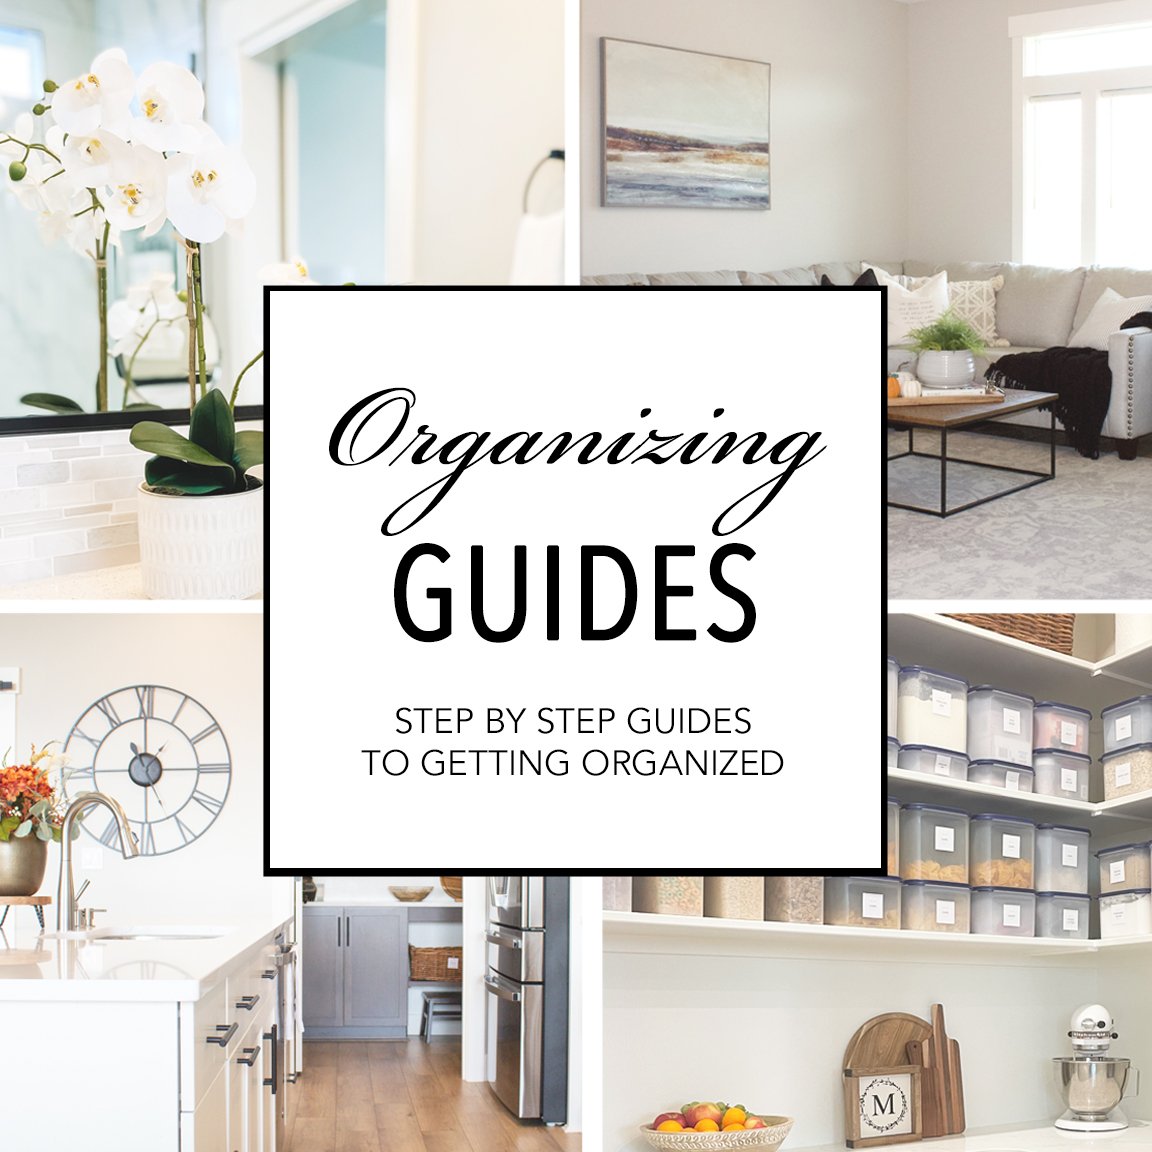 ORGANIZING GUIDES (Copy)